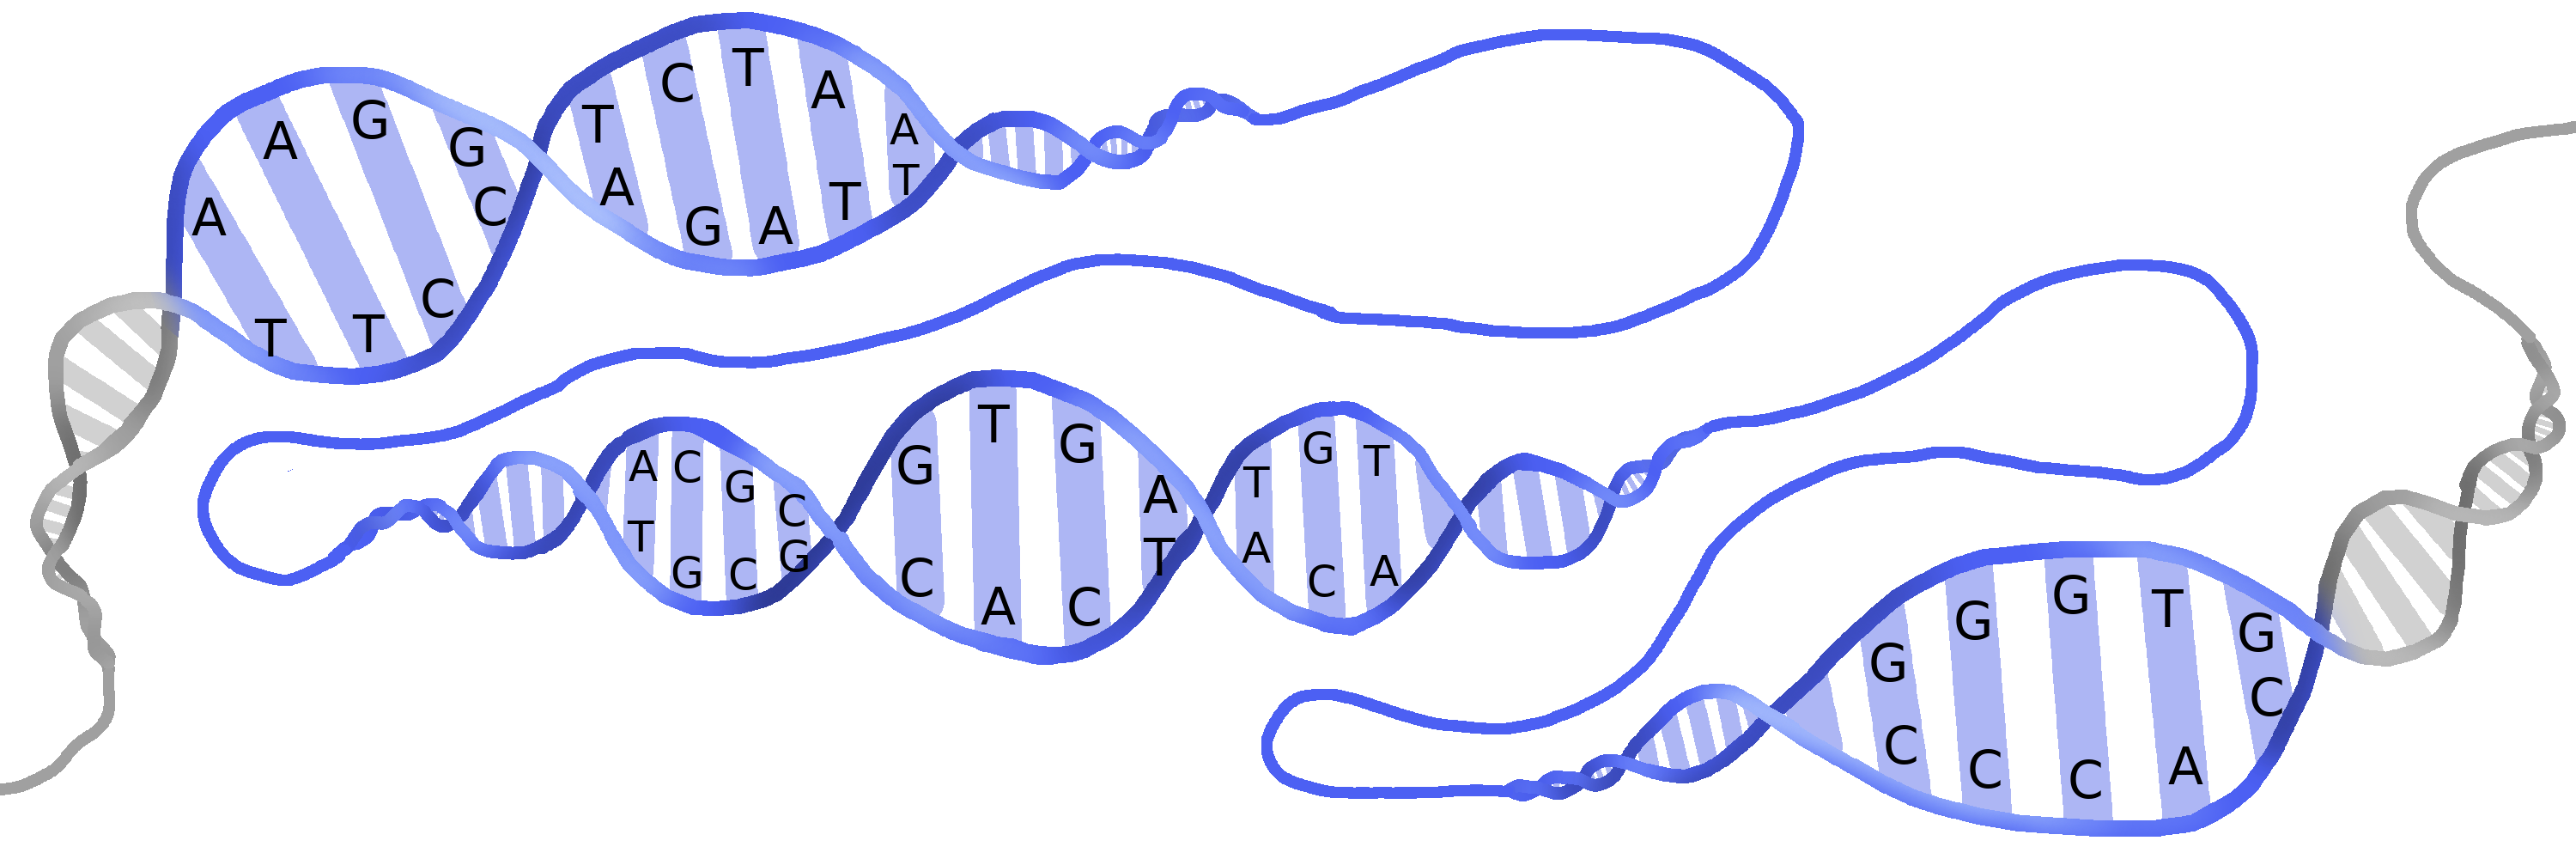 A gene within a larger piece of DNA